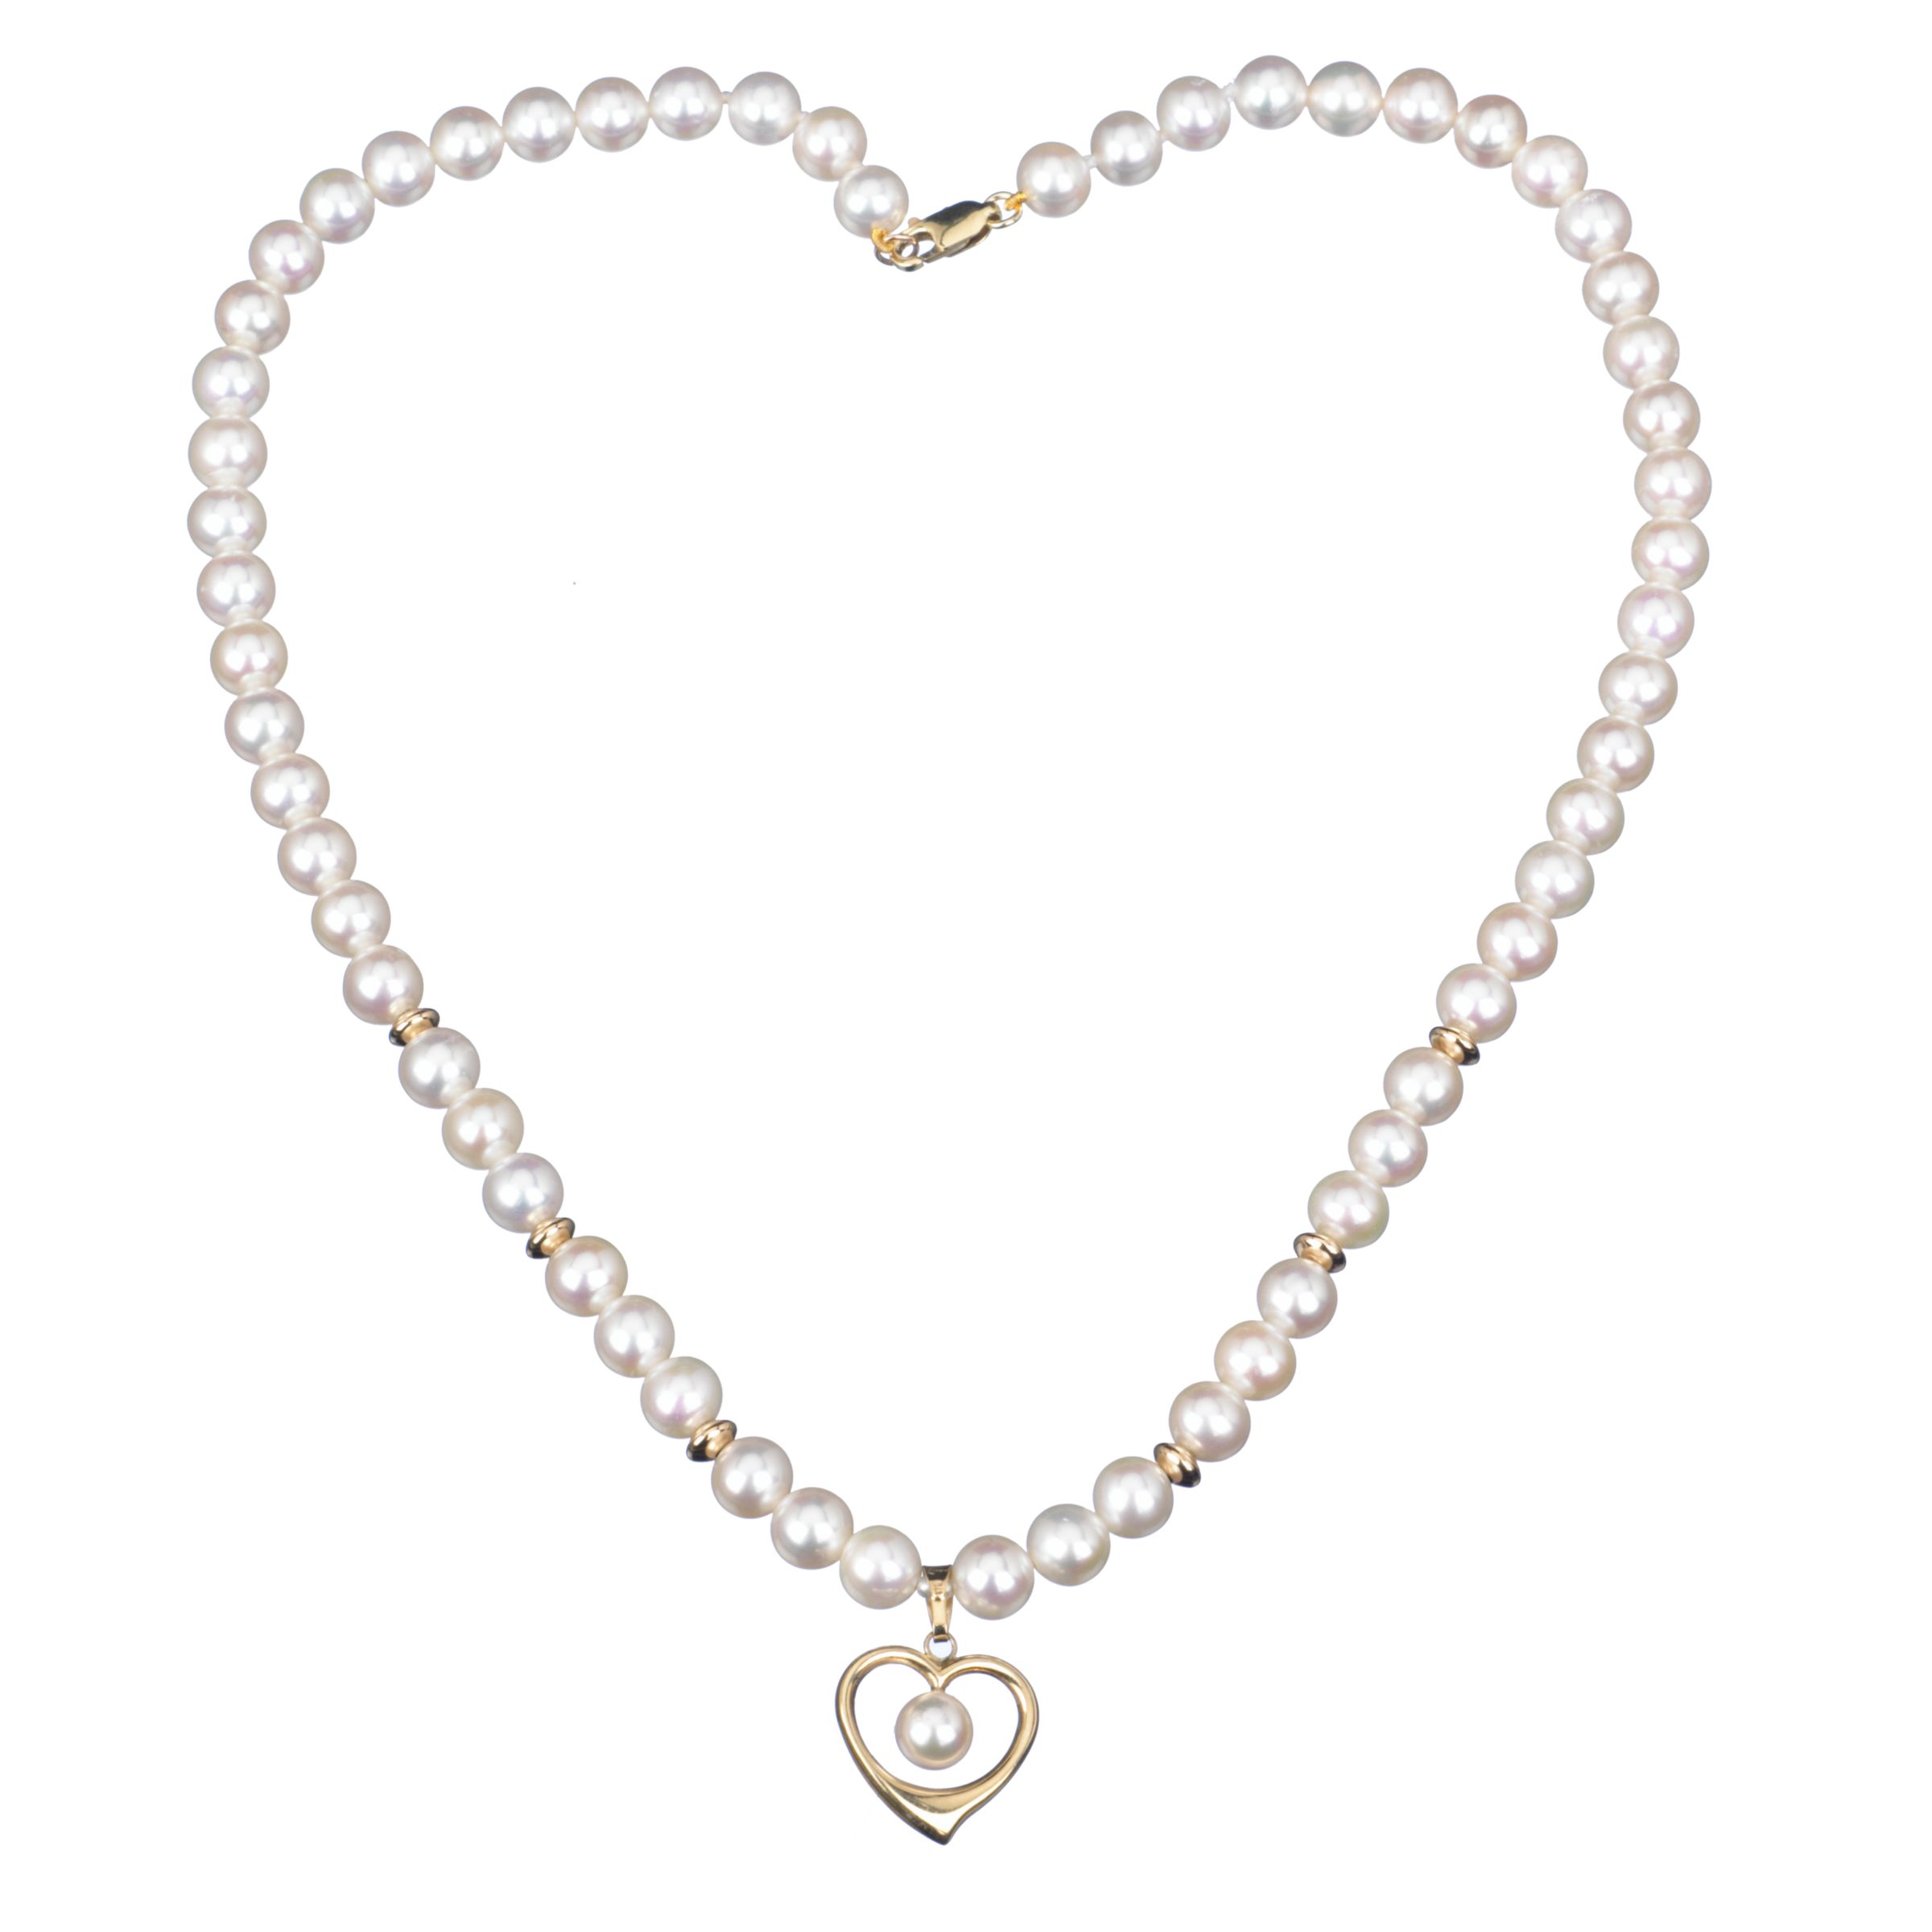 Freshwater Pearl and Gold Bead Necklace With Heart Pendant